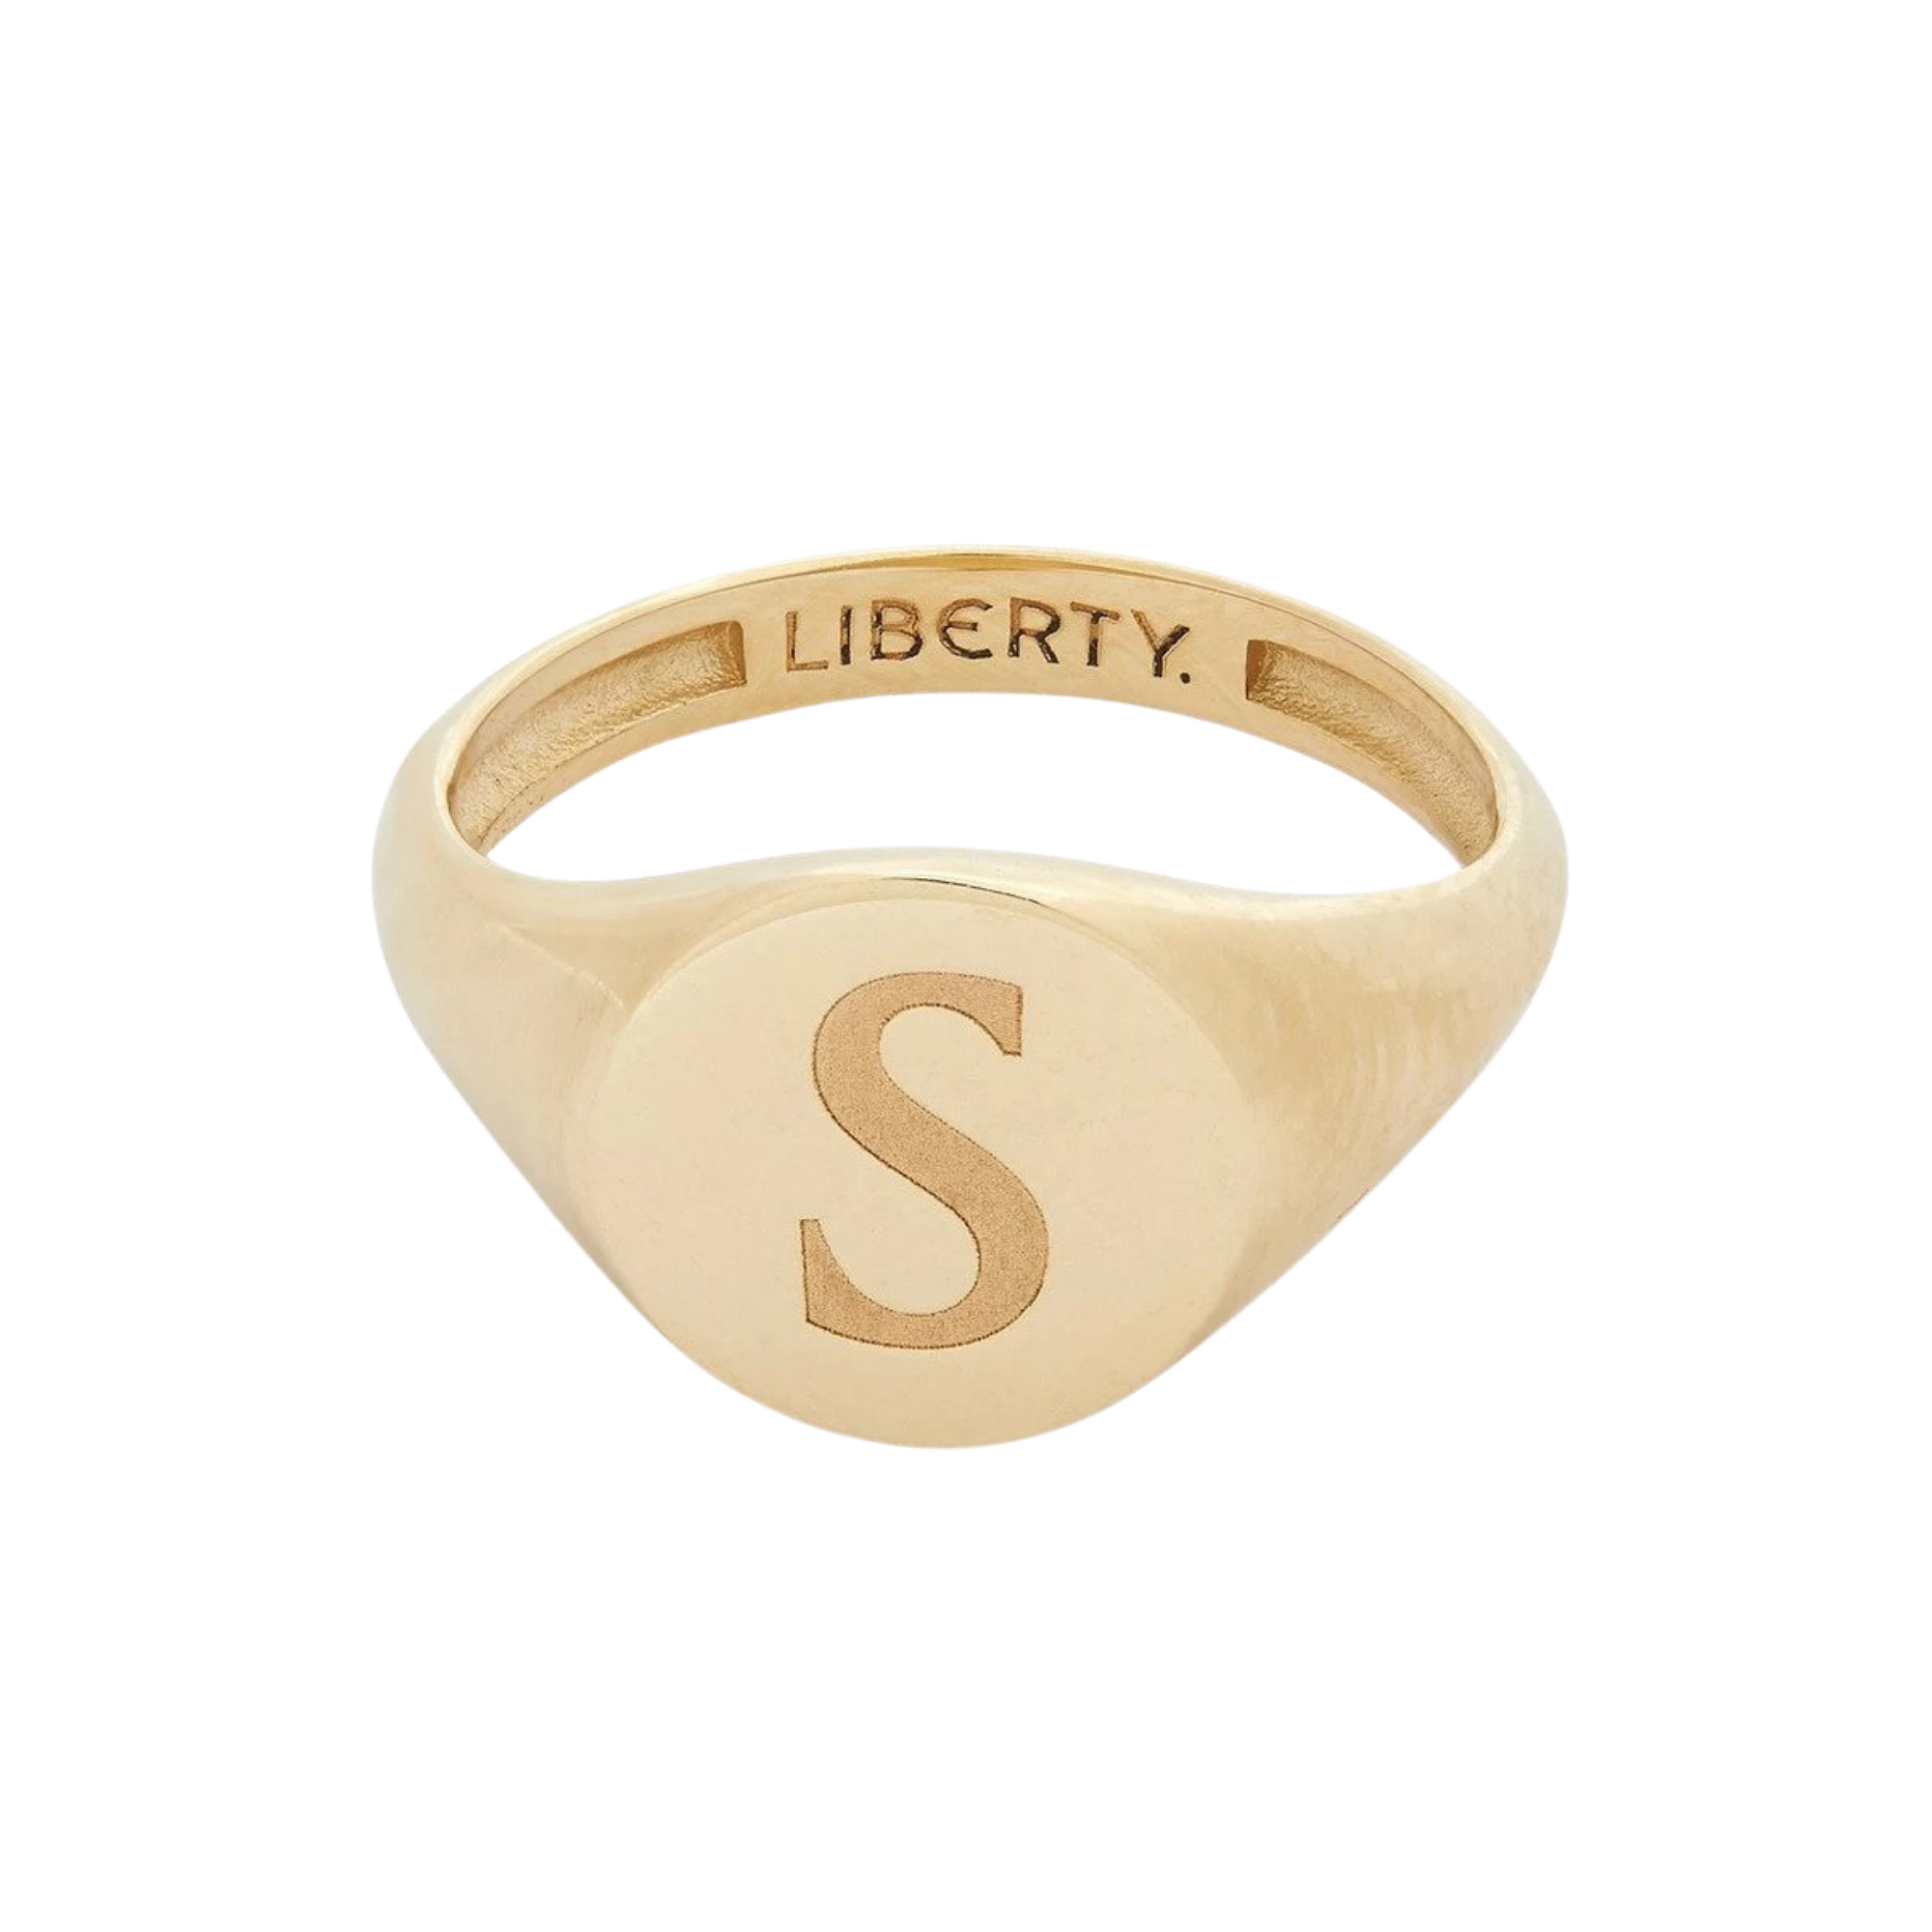 Liberty Gold “S” Initial Signet Ring, $365 